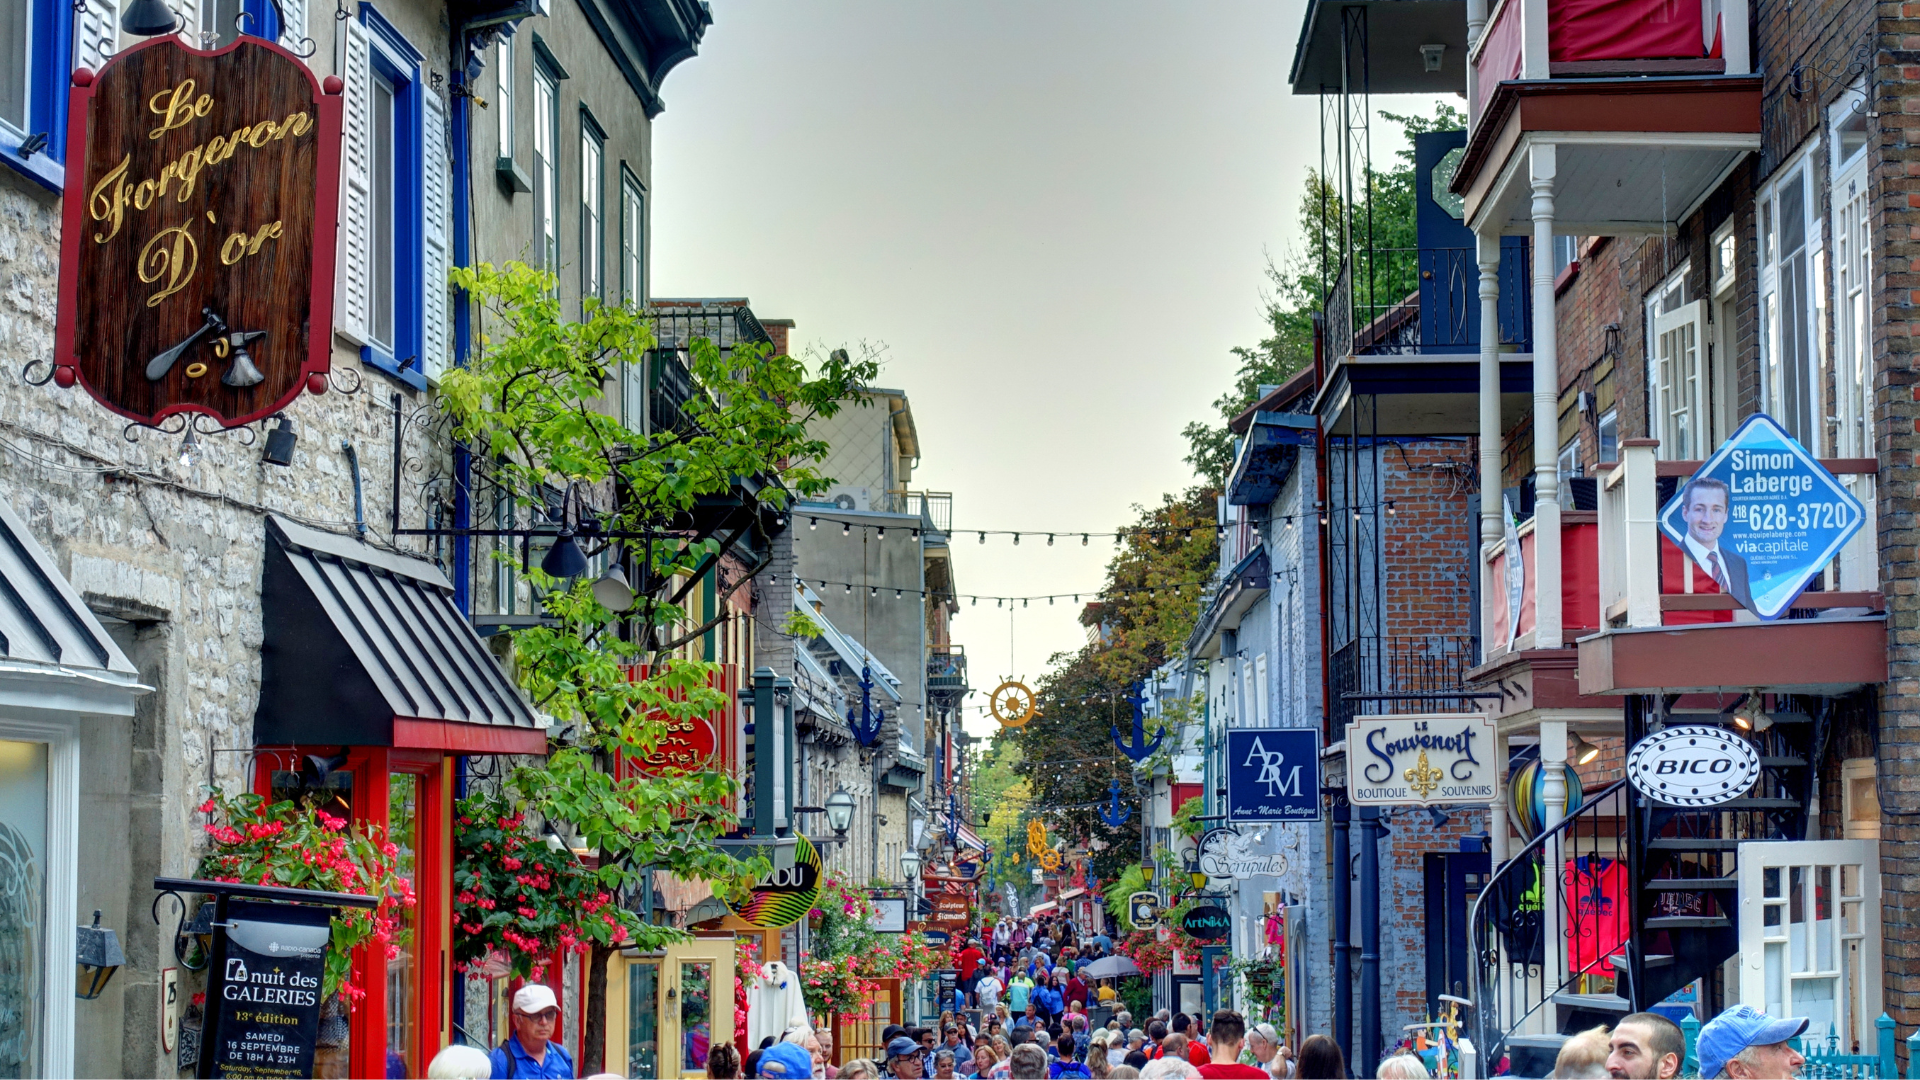 Quebec City is one of the most walkable cities in the world